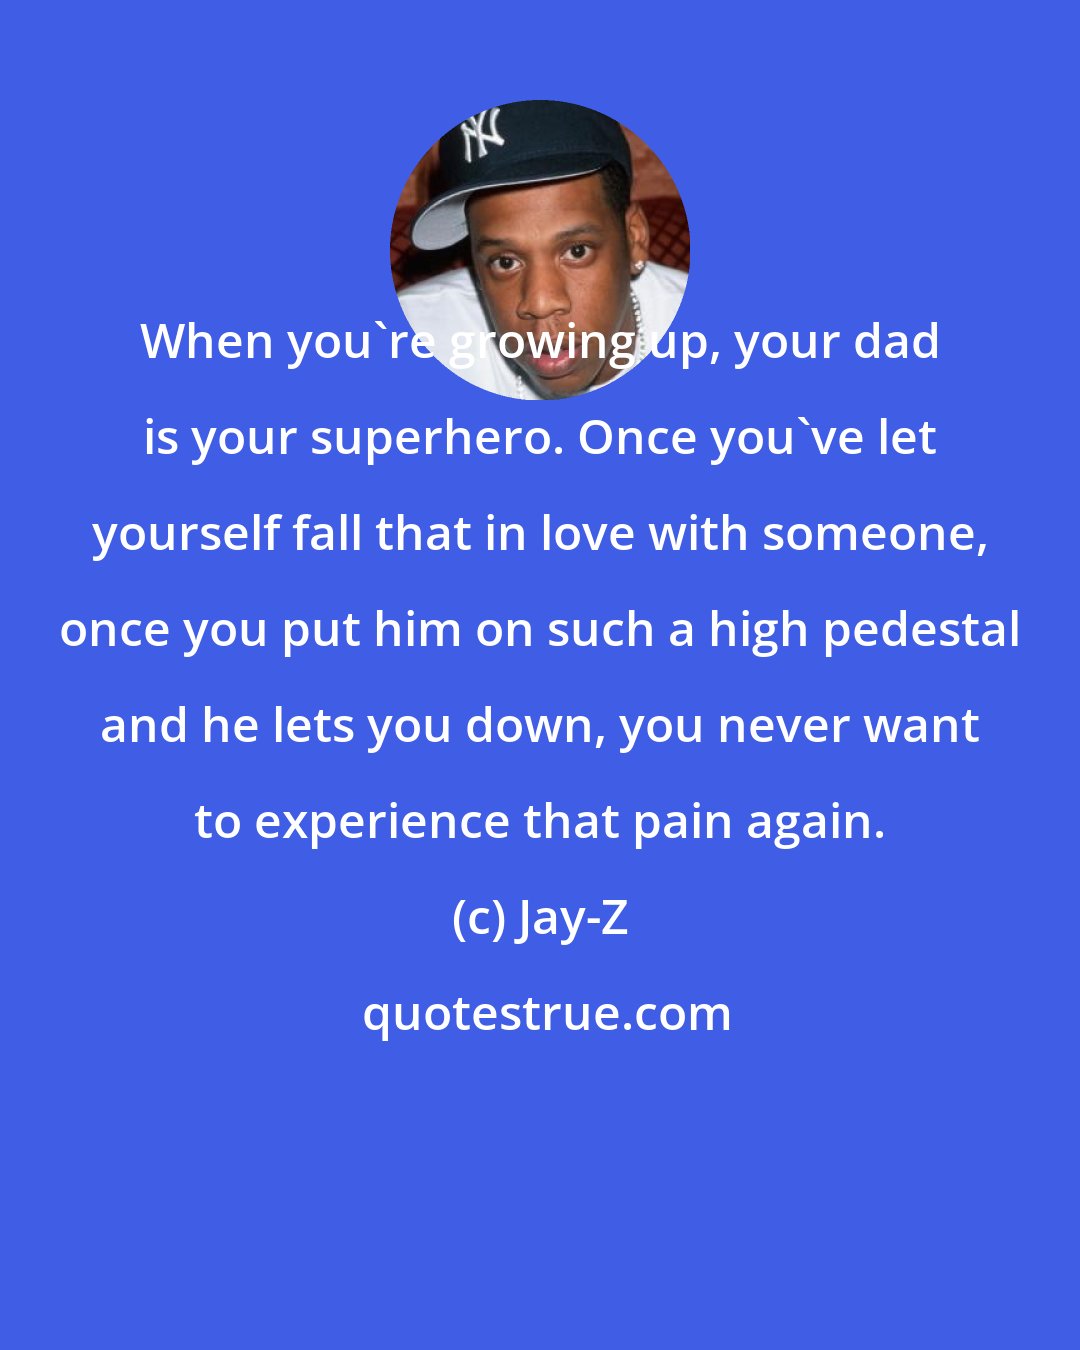 Jay-Z: When you're growing up, your dad is your superhero. Once you've let yourself fall that in love with someone, once you put him on such a high pedestal and he lets you down, you never want to experience that pain again.